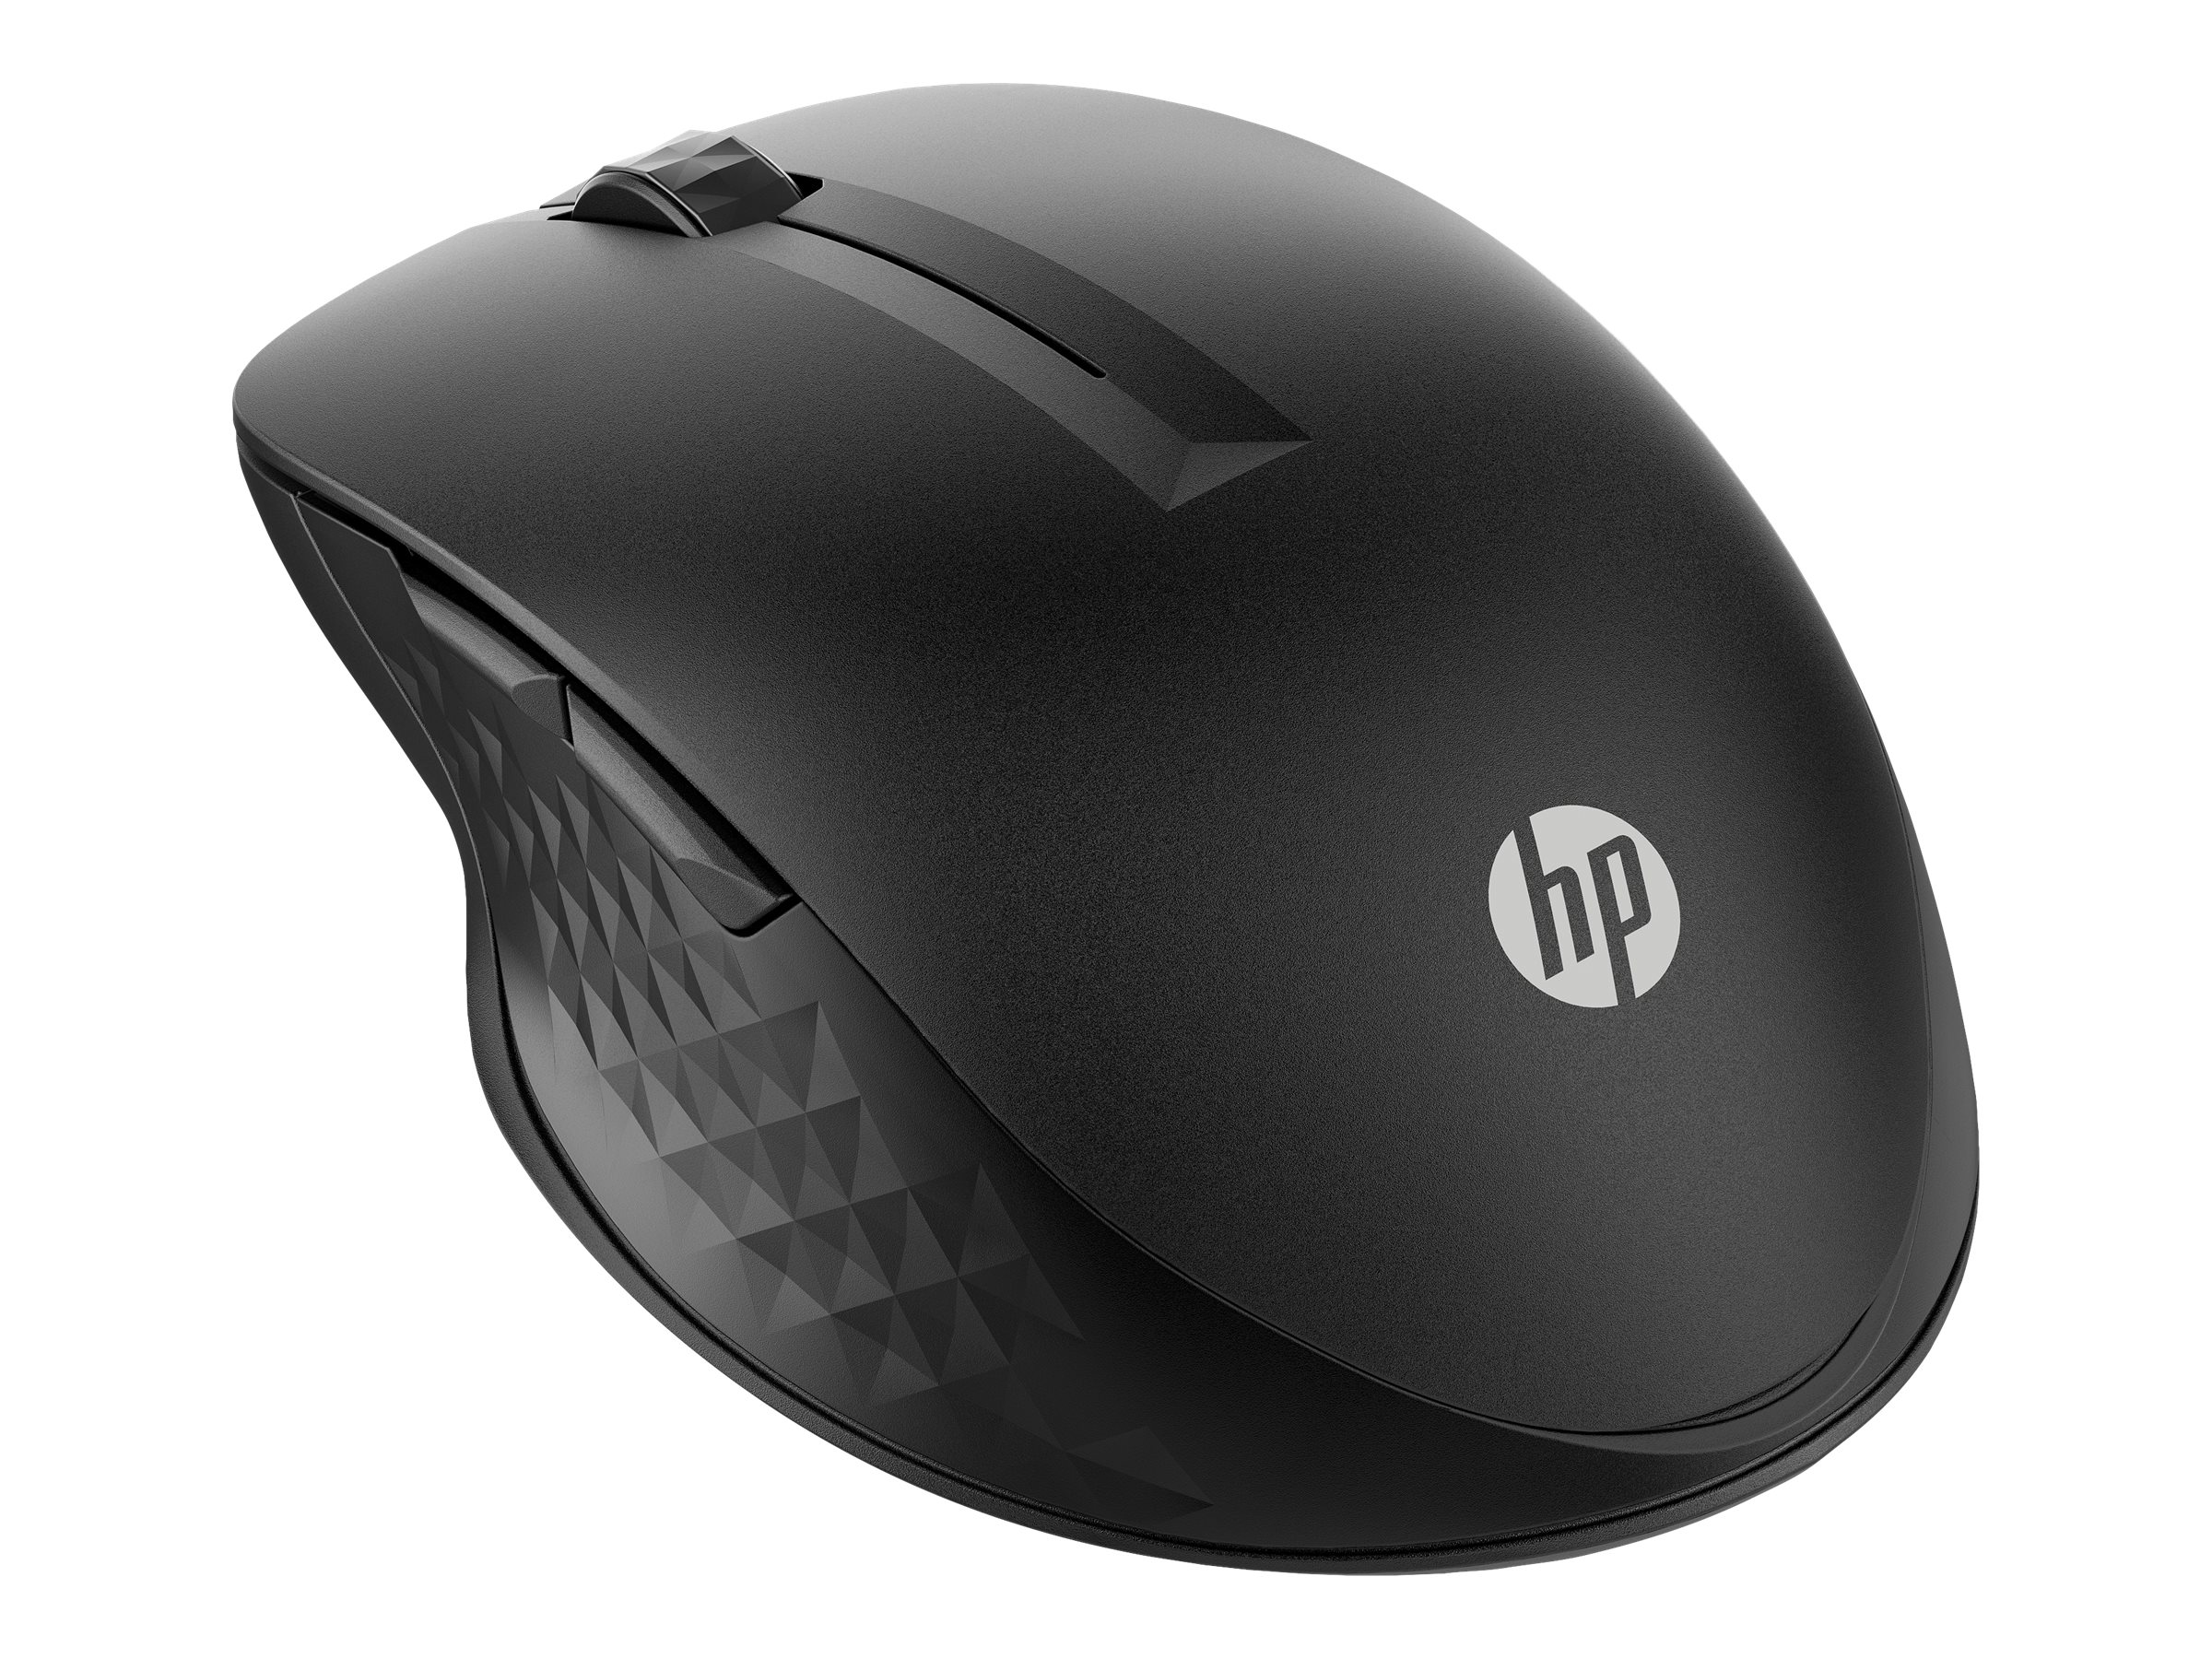 HP HP Mouse Wireless Mouse, Multi-Device, - Baechler 430, Multi-Device, Informatique 430, Wireless